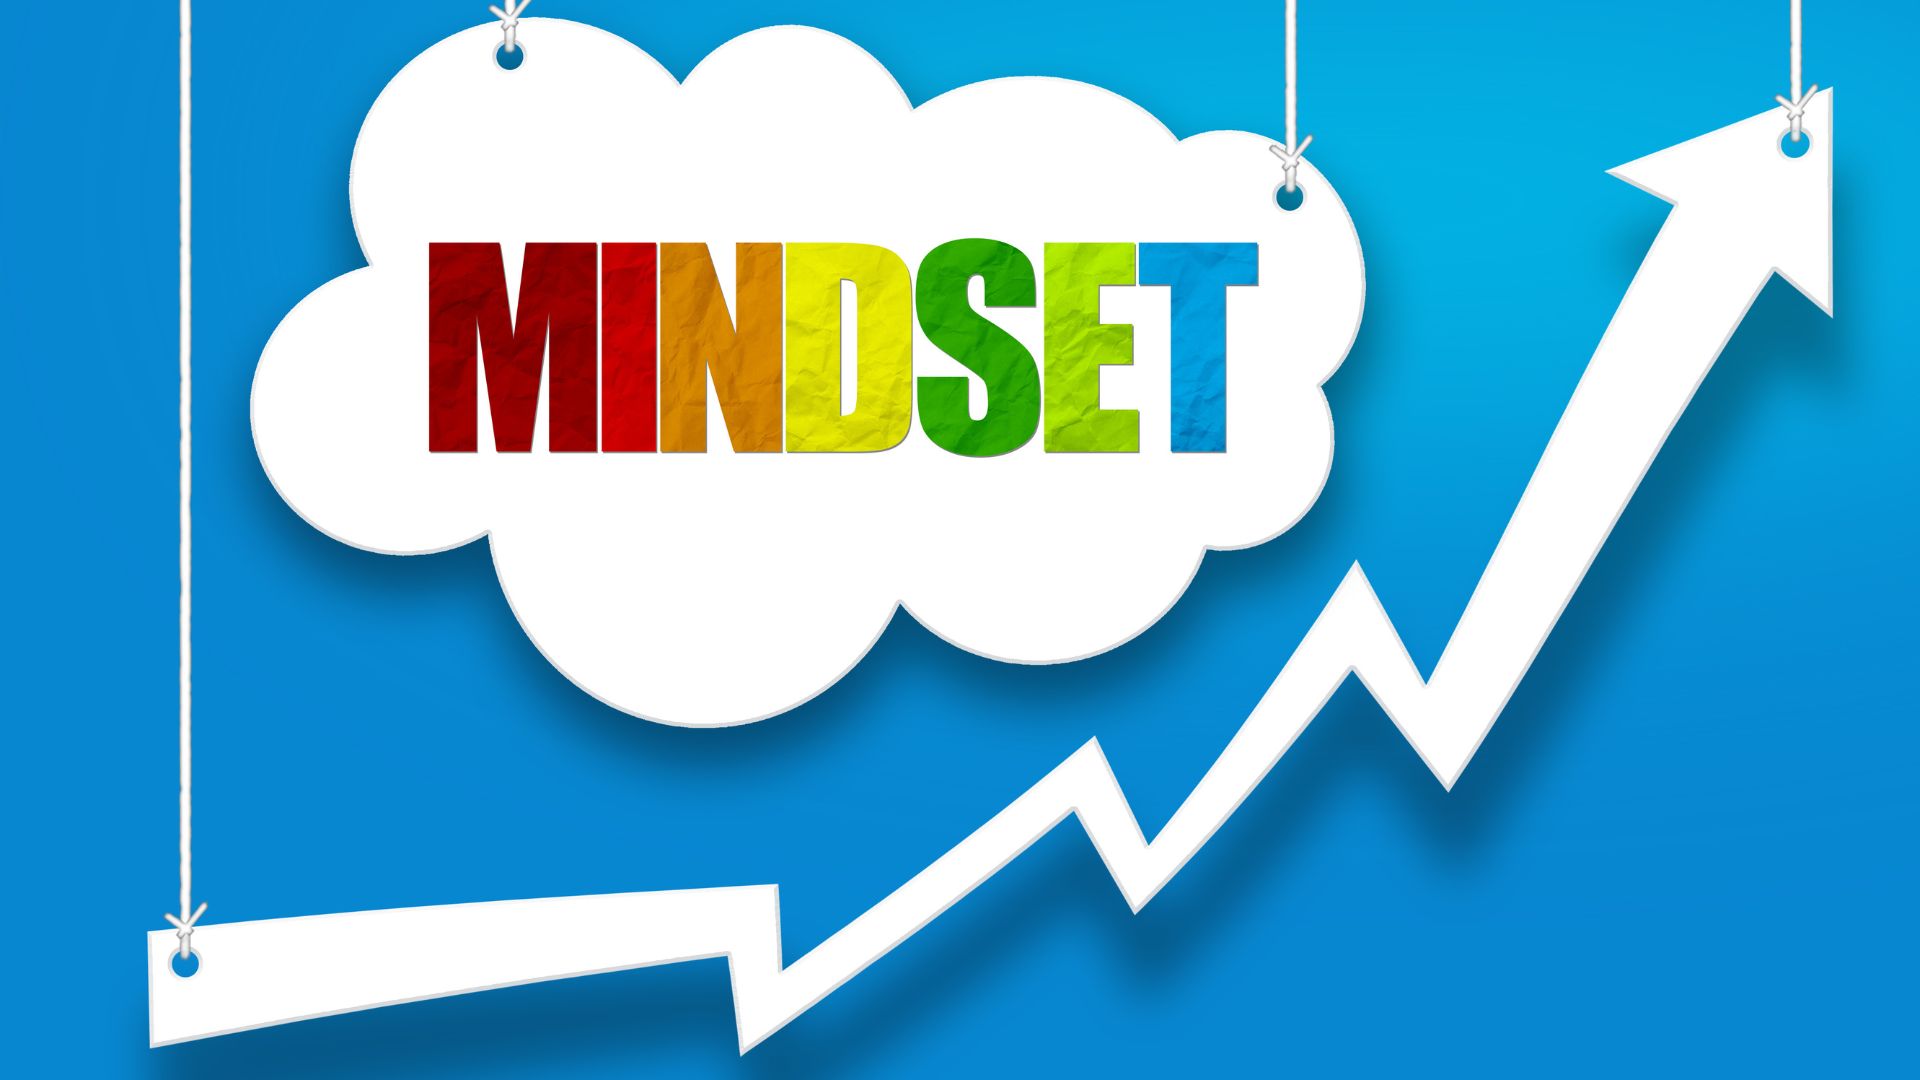 Mindset is a choice that helps you grow